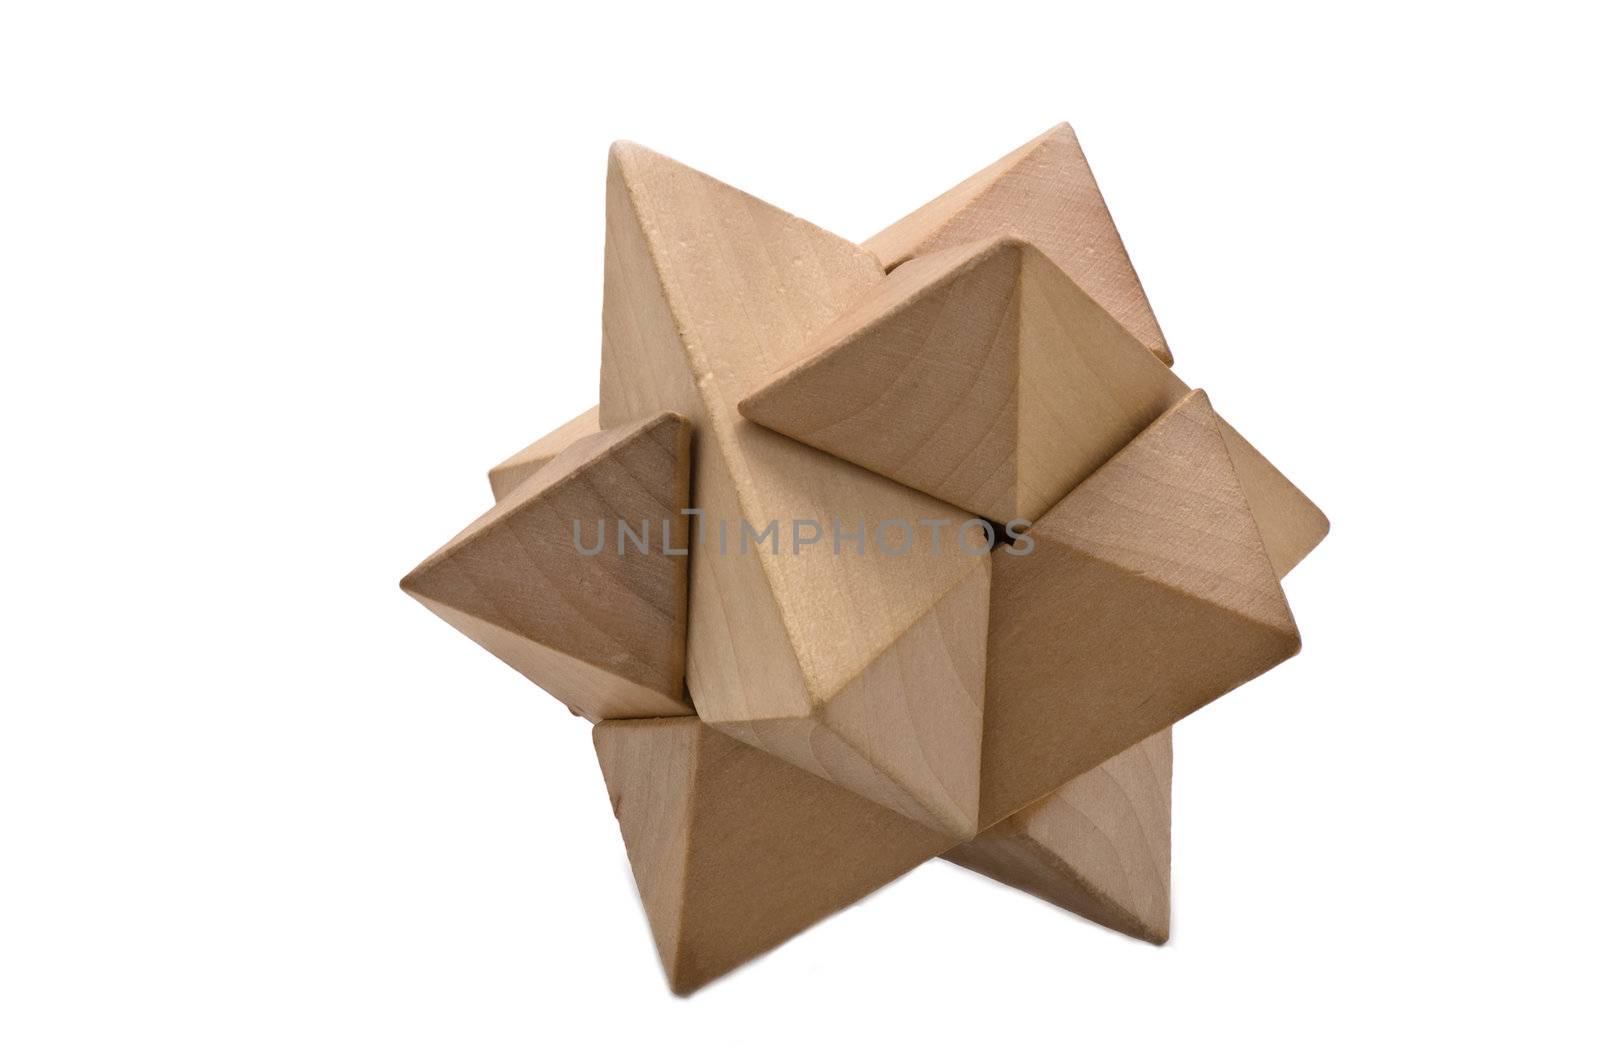 Wooden 3D puzzle on white